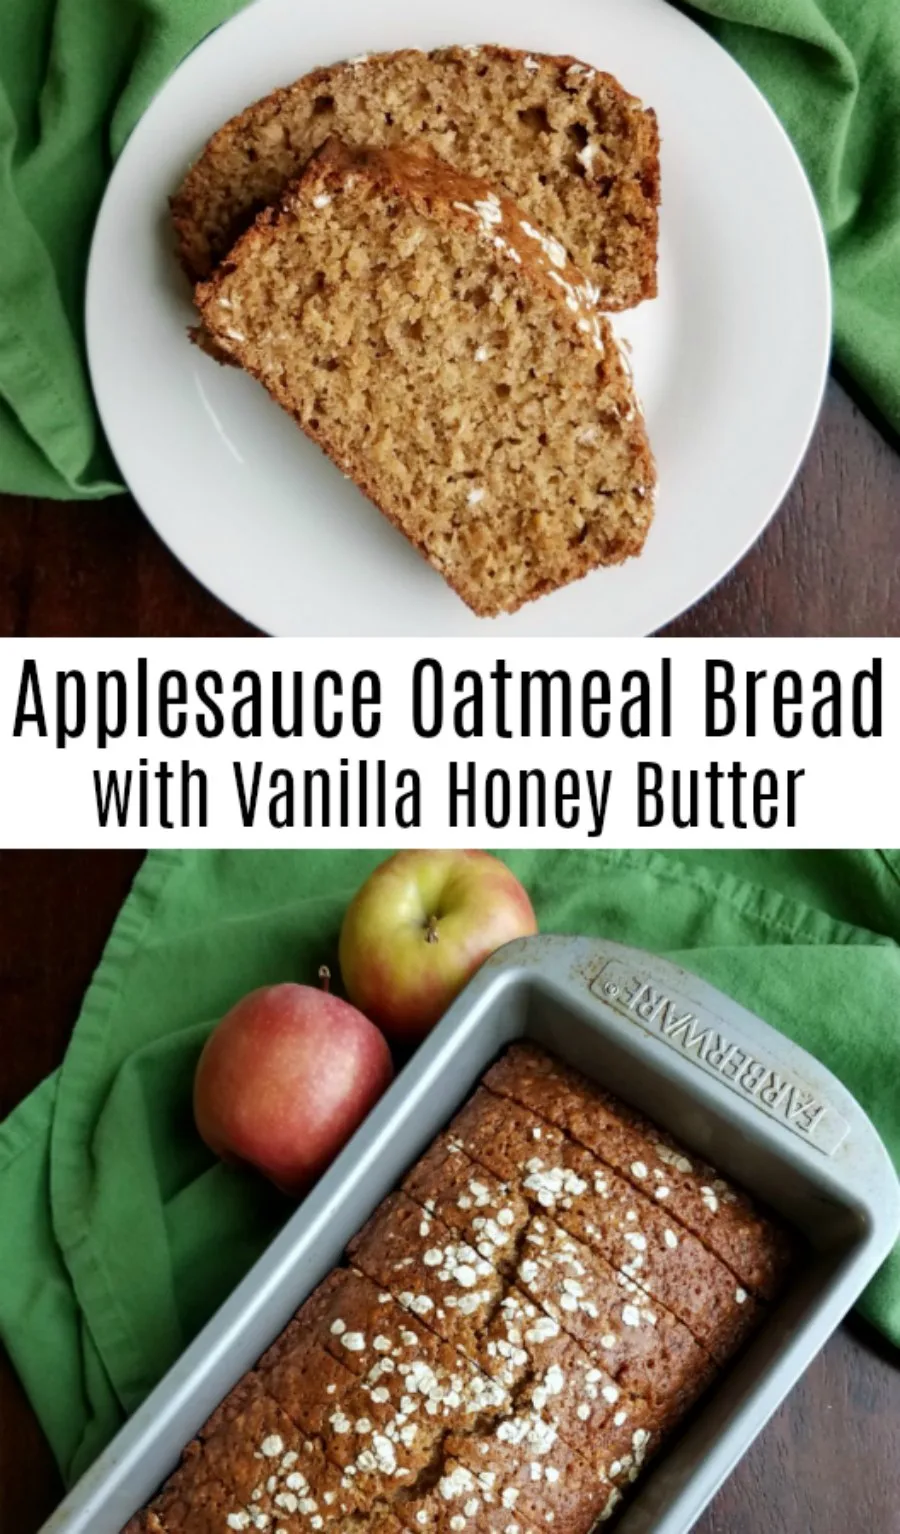 Applesauce oatmeal bread is a delicious sweet quick bread that's perfect for breakfast, tea time, snack or even a light dessert. The vanilla honey butter helps take to the next level of yumminess!